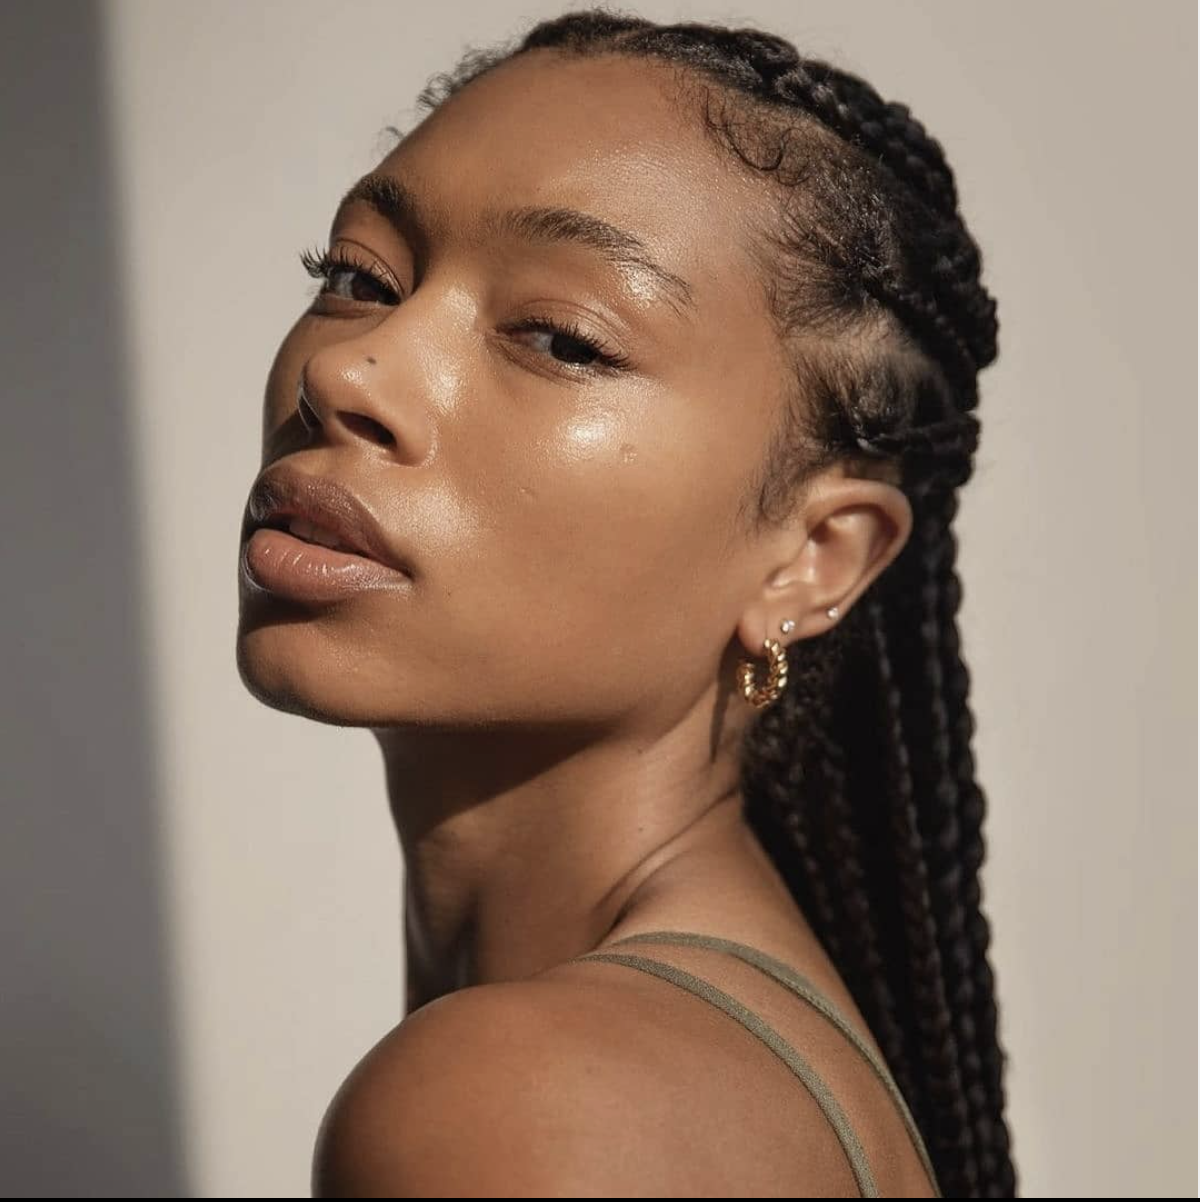 Black Owned Beauty and Wellness Businesses To Invest In